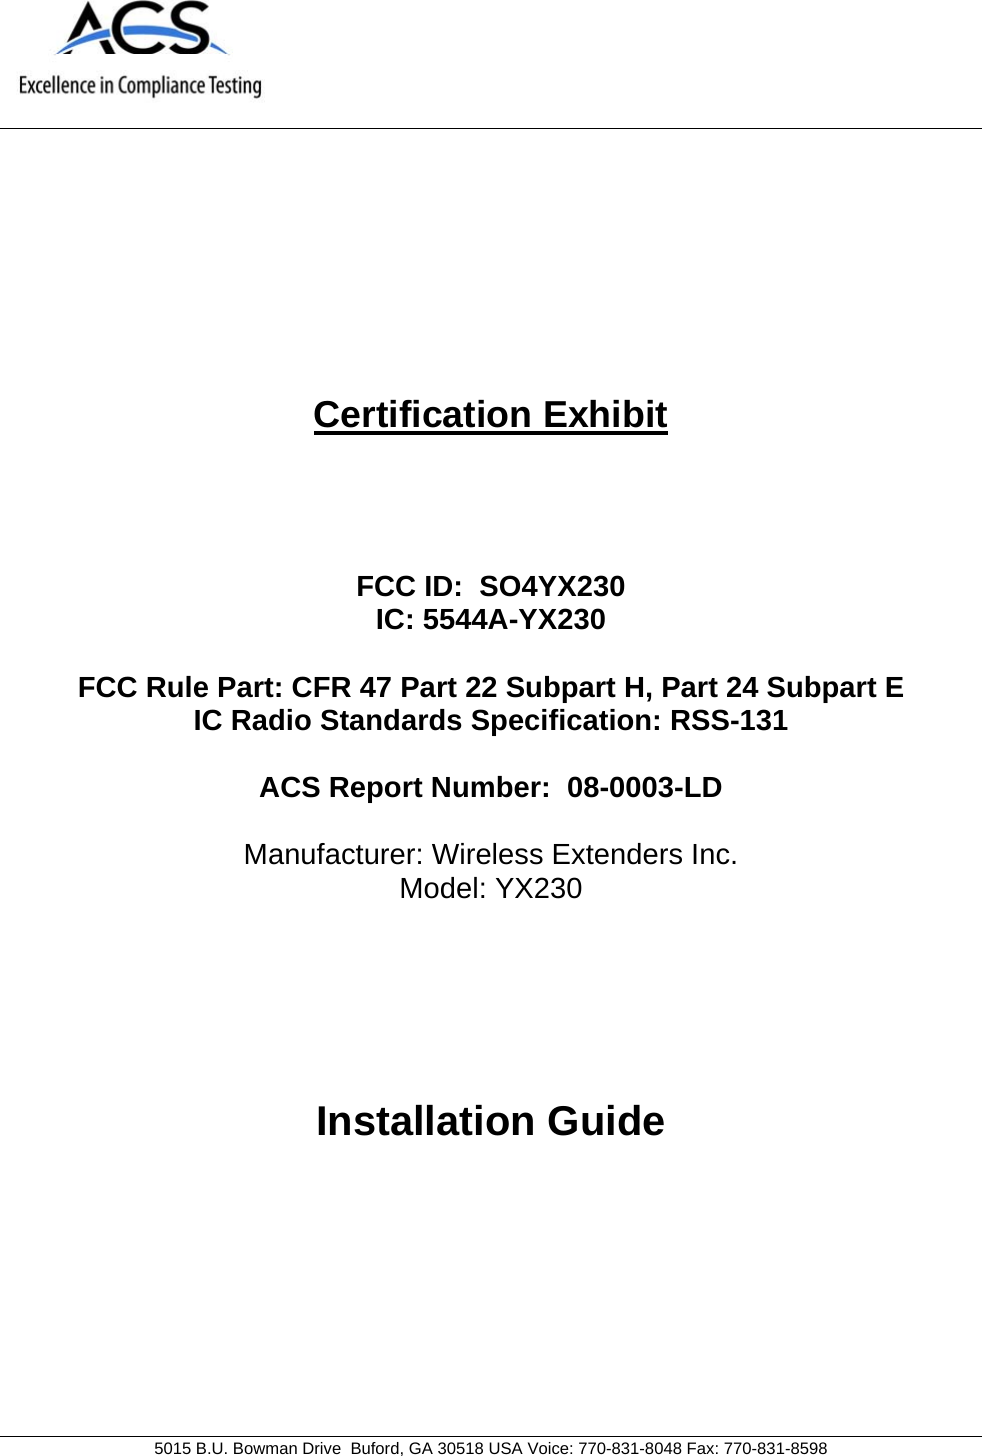     5015 B.U. Bowman Drive  Buford, GA 30518 USA Voice: 770-831-8048 Fax: 770-831-8598   Certification Exhibit     FCC ID:  SO4YX230 IC: 5544A-YX230  FCC Rule Part: CFR 47 Part 22 Subpart H, Part 24 Subpart E IC Radio Standards Specification: RSS-131   ACS Report Number:  08-0003-LD   Manufacturer: Wireless Extenders Inc. Model: YX230     Installation Guide  